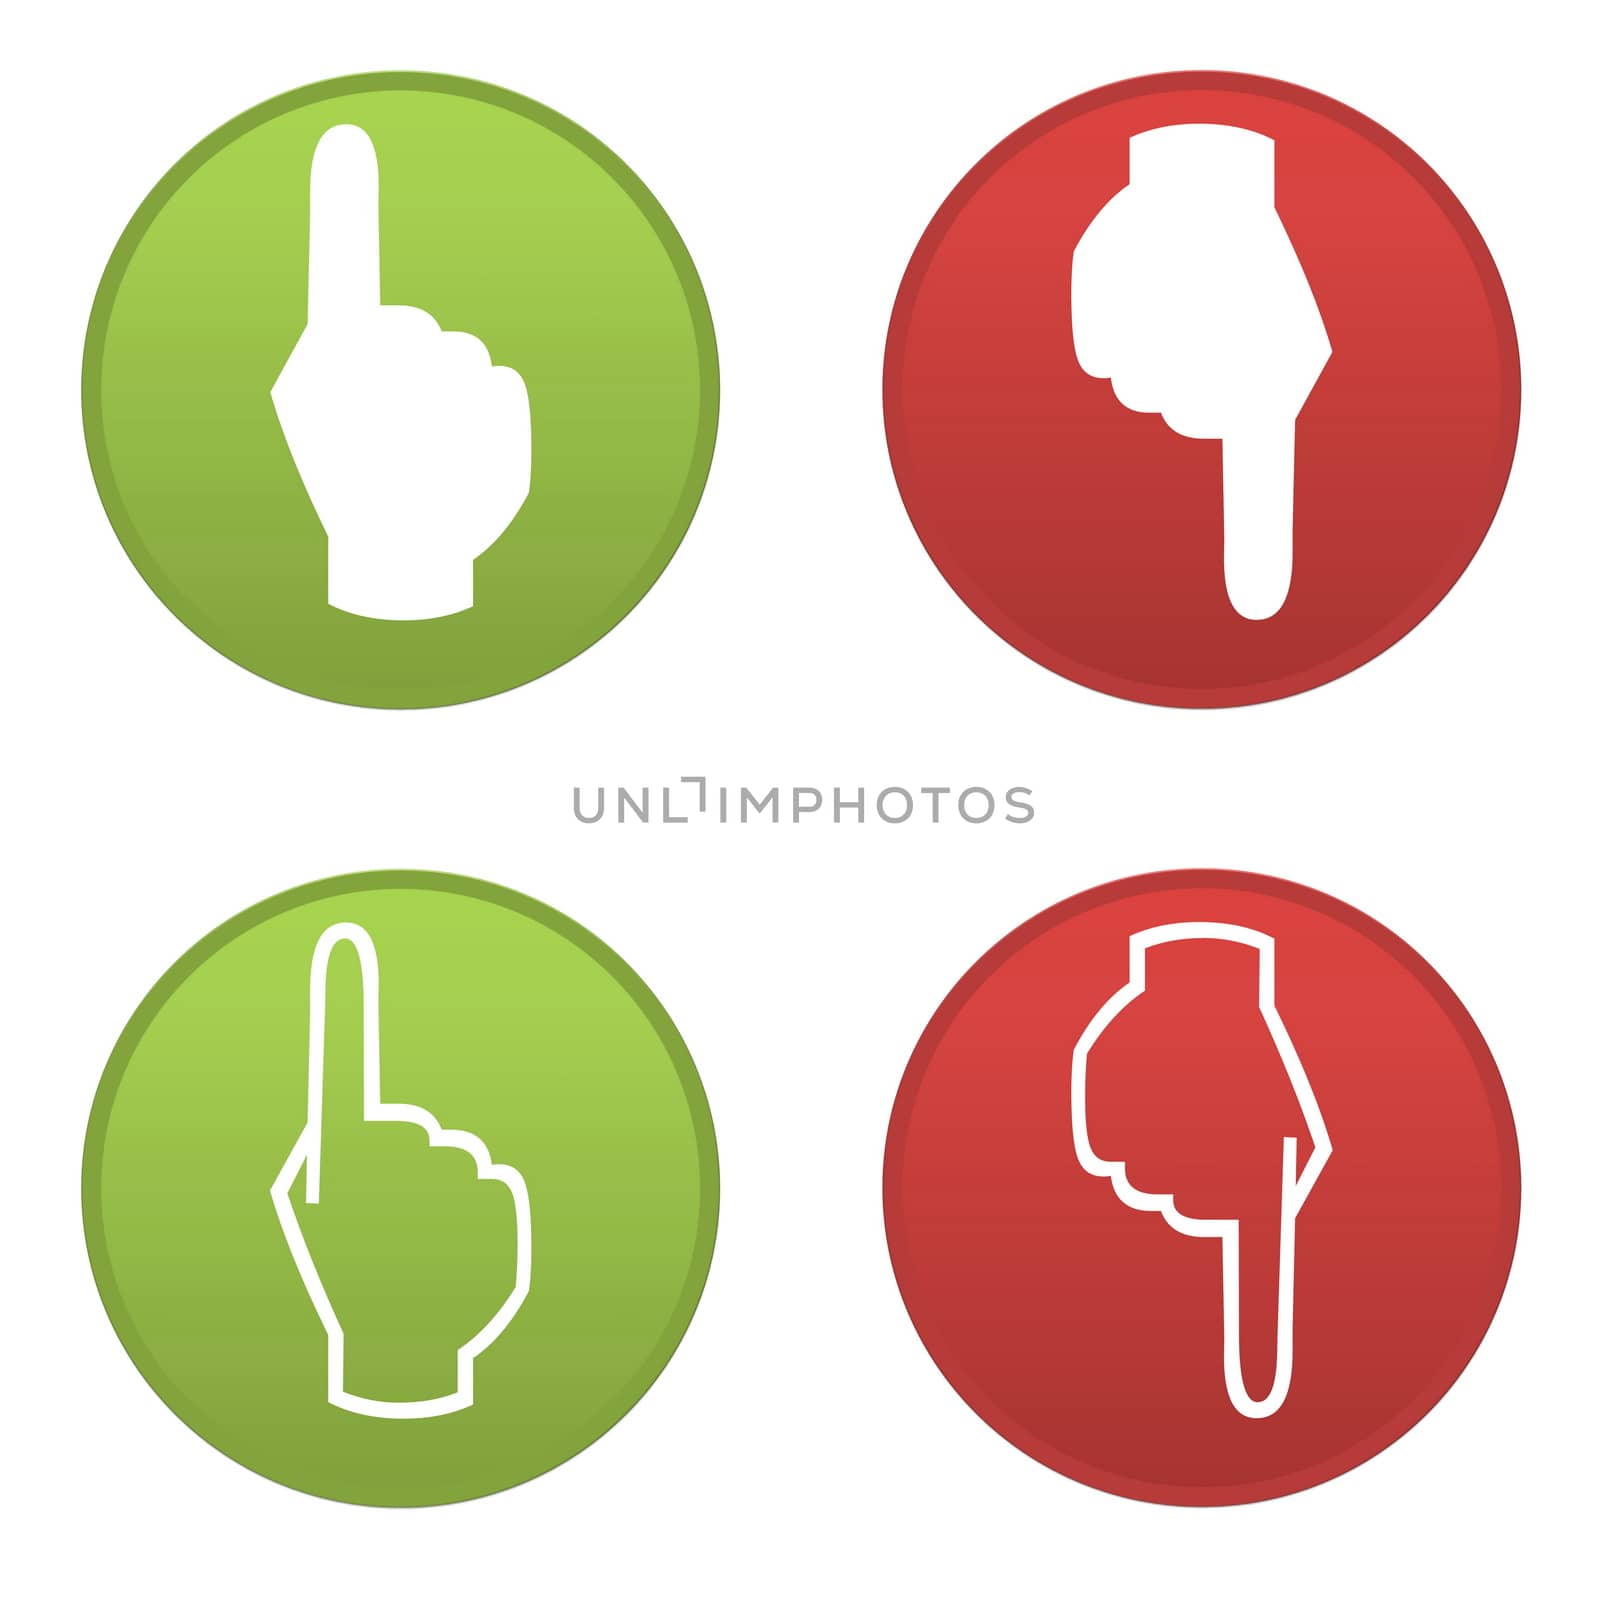 Set of hand direction icons isolated in white background